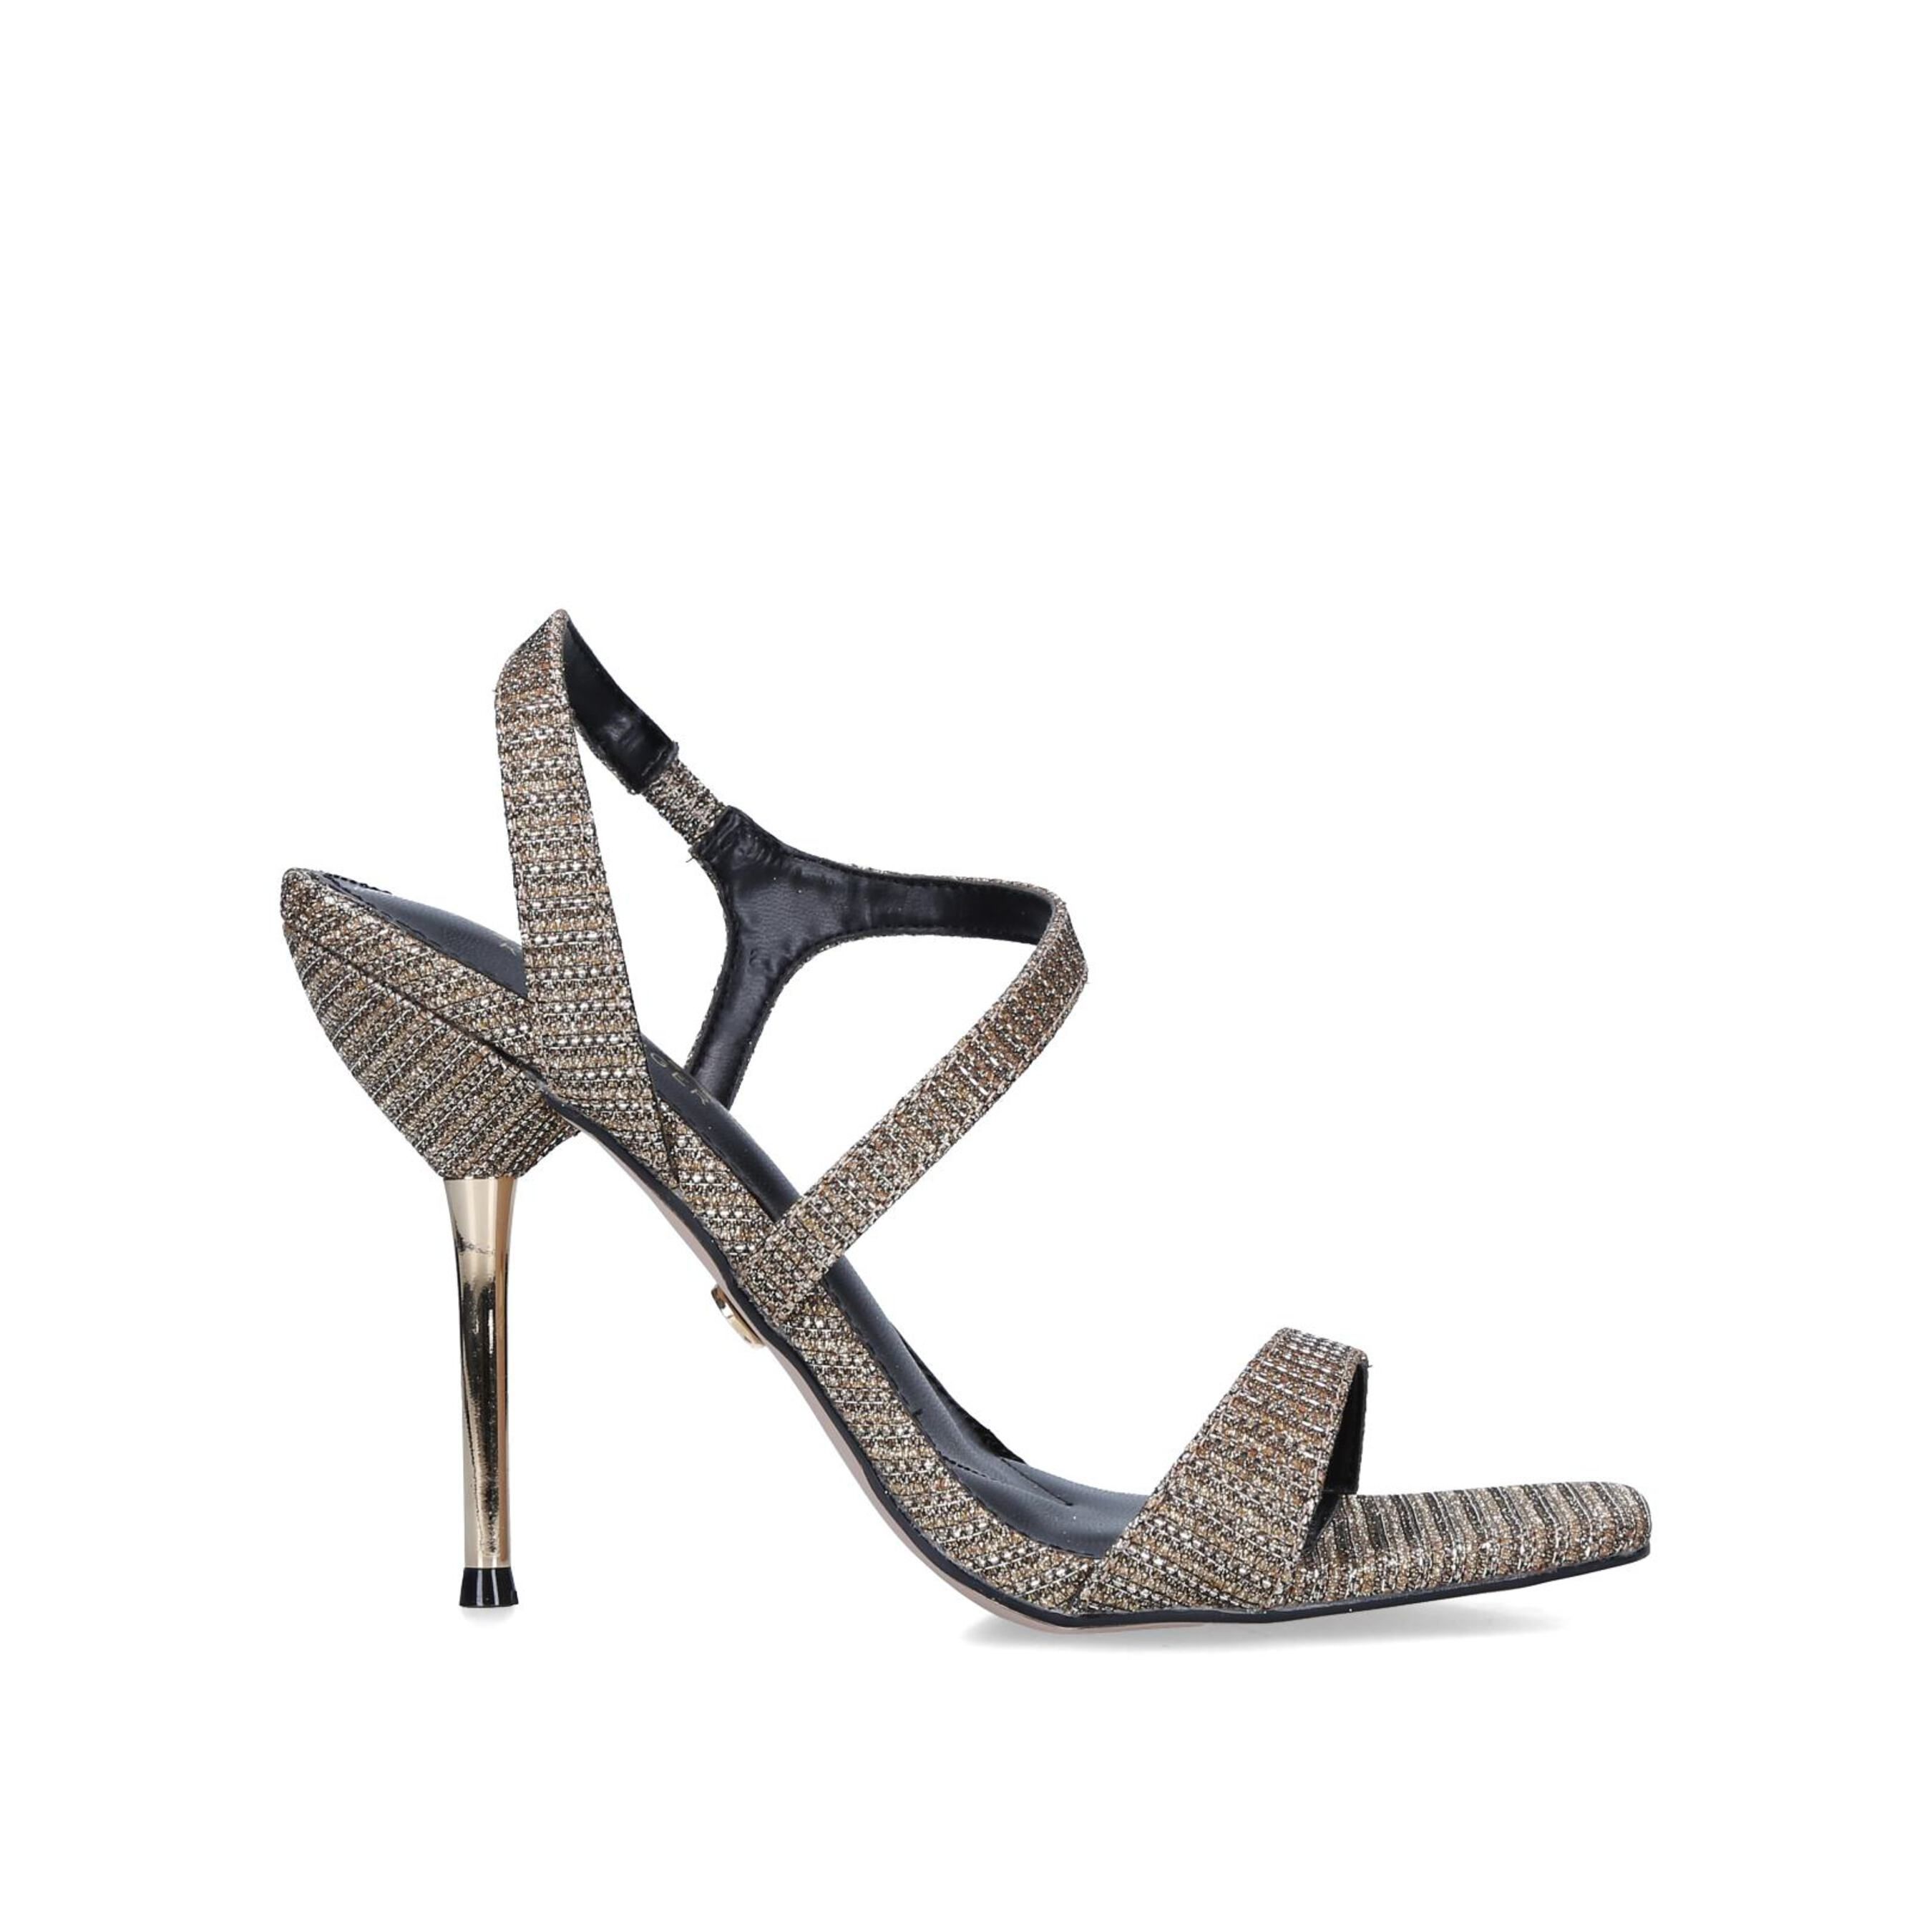 The Priya heels from Miss KG in gold lizard print add a sophisticated addition to any shoe collection, their black upper elongates the leg.